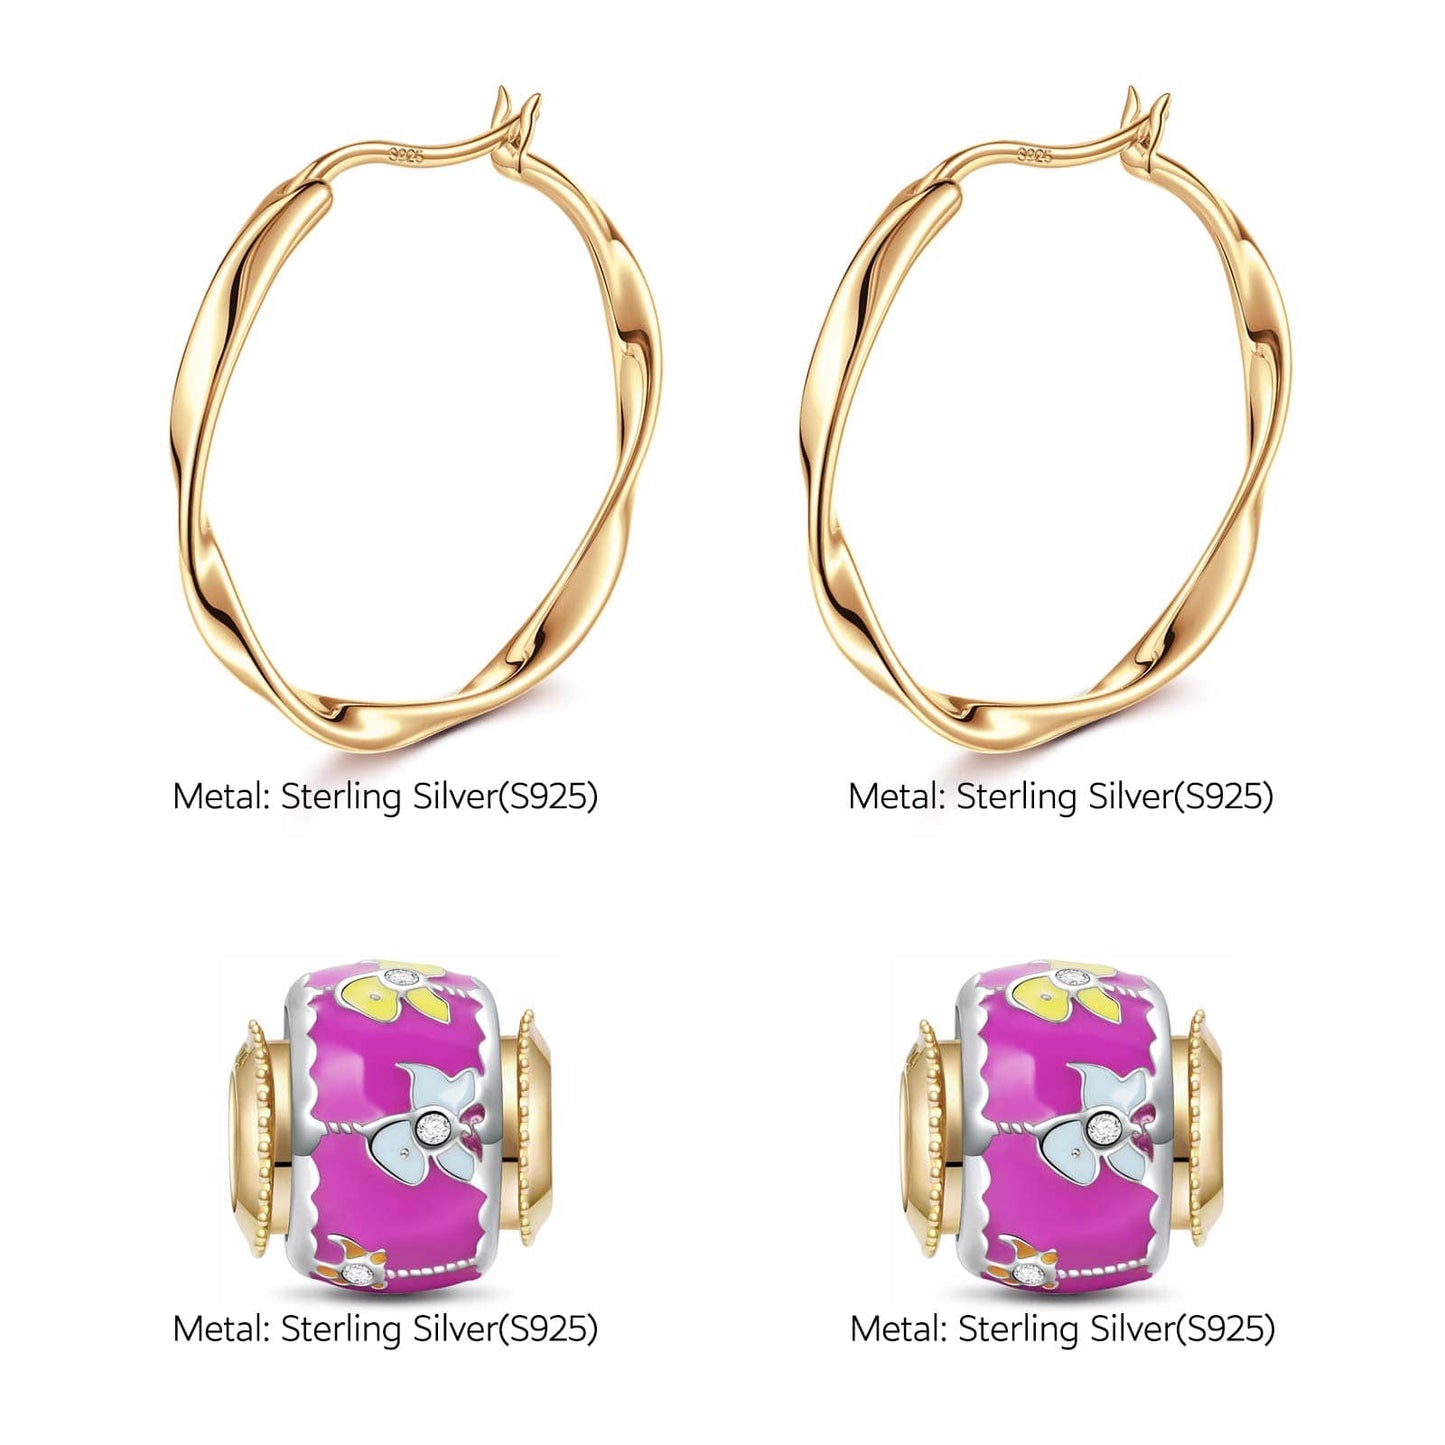 Sterling Silver Happy Transport Charms Earrings Set With Enamel In 14K Gold Plated